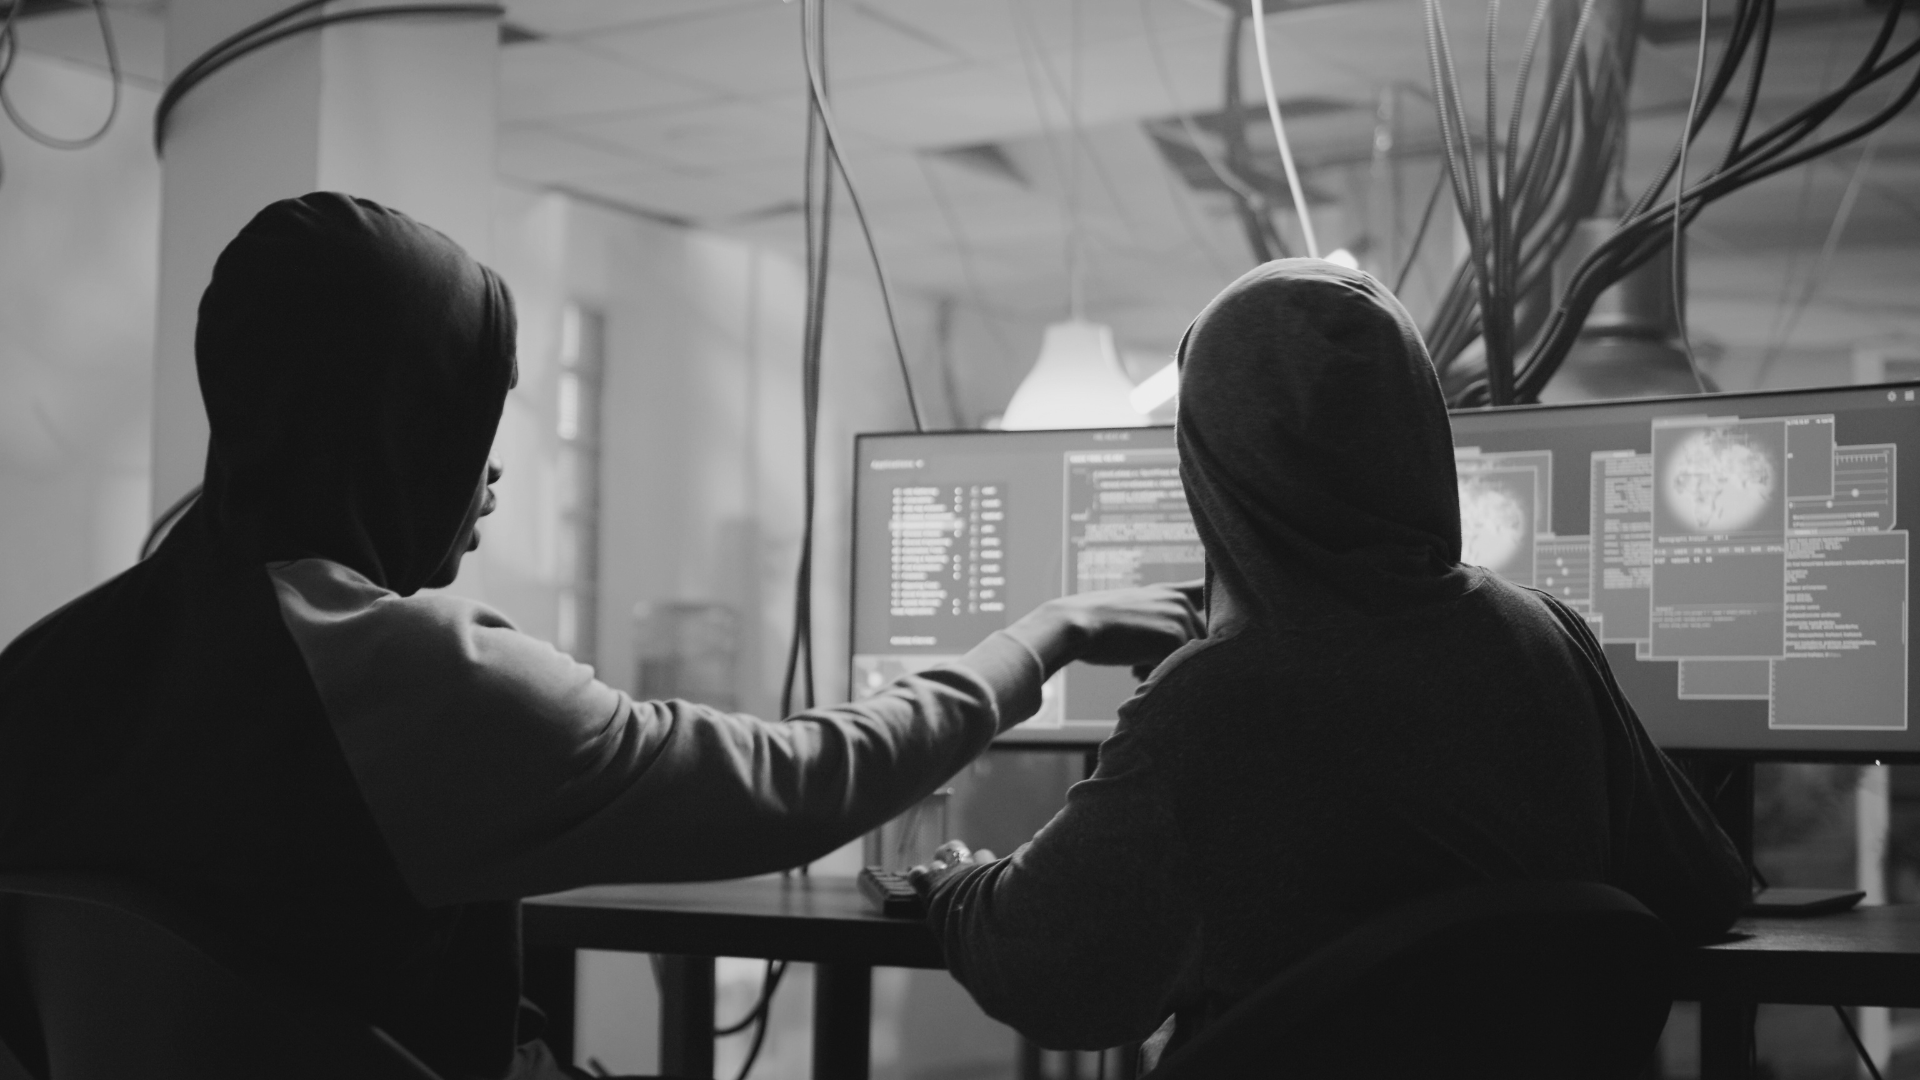 Two men in hoodies are looking at a computer screen.